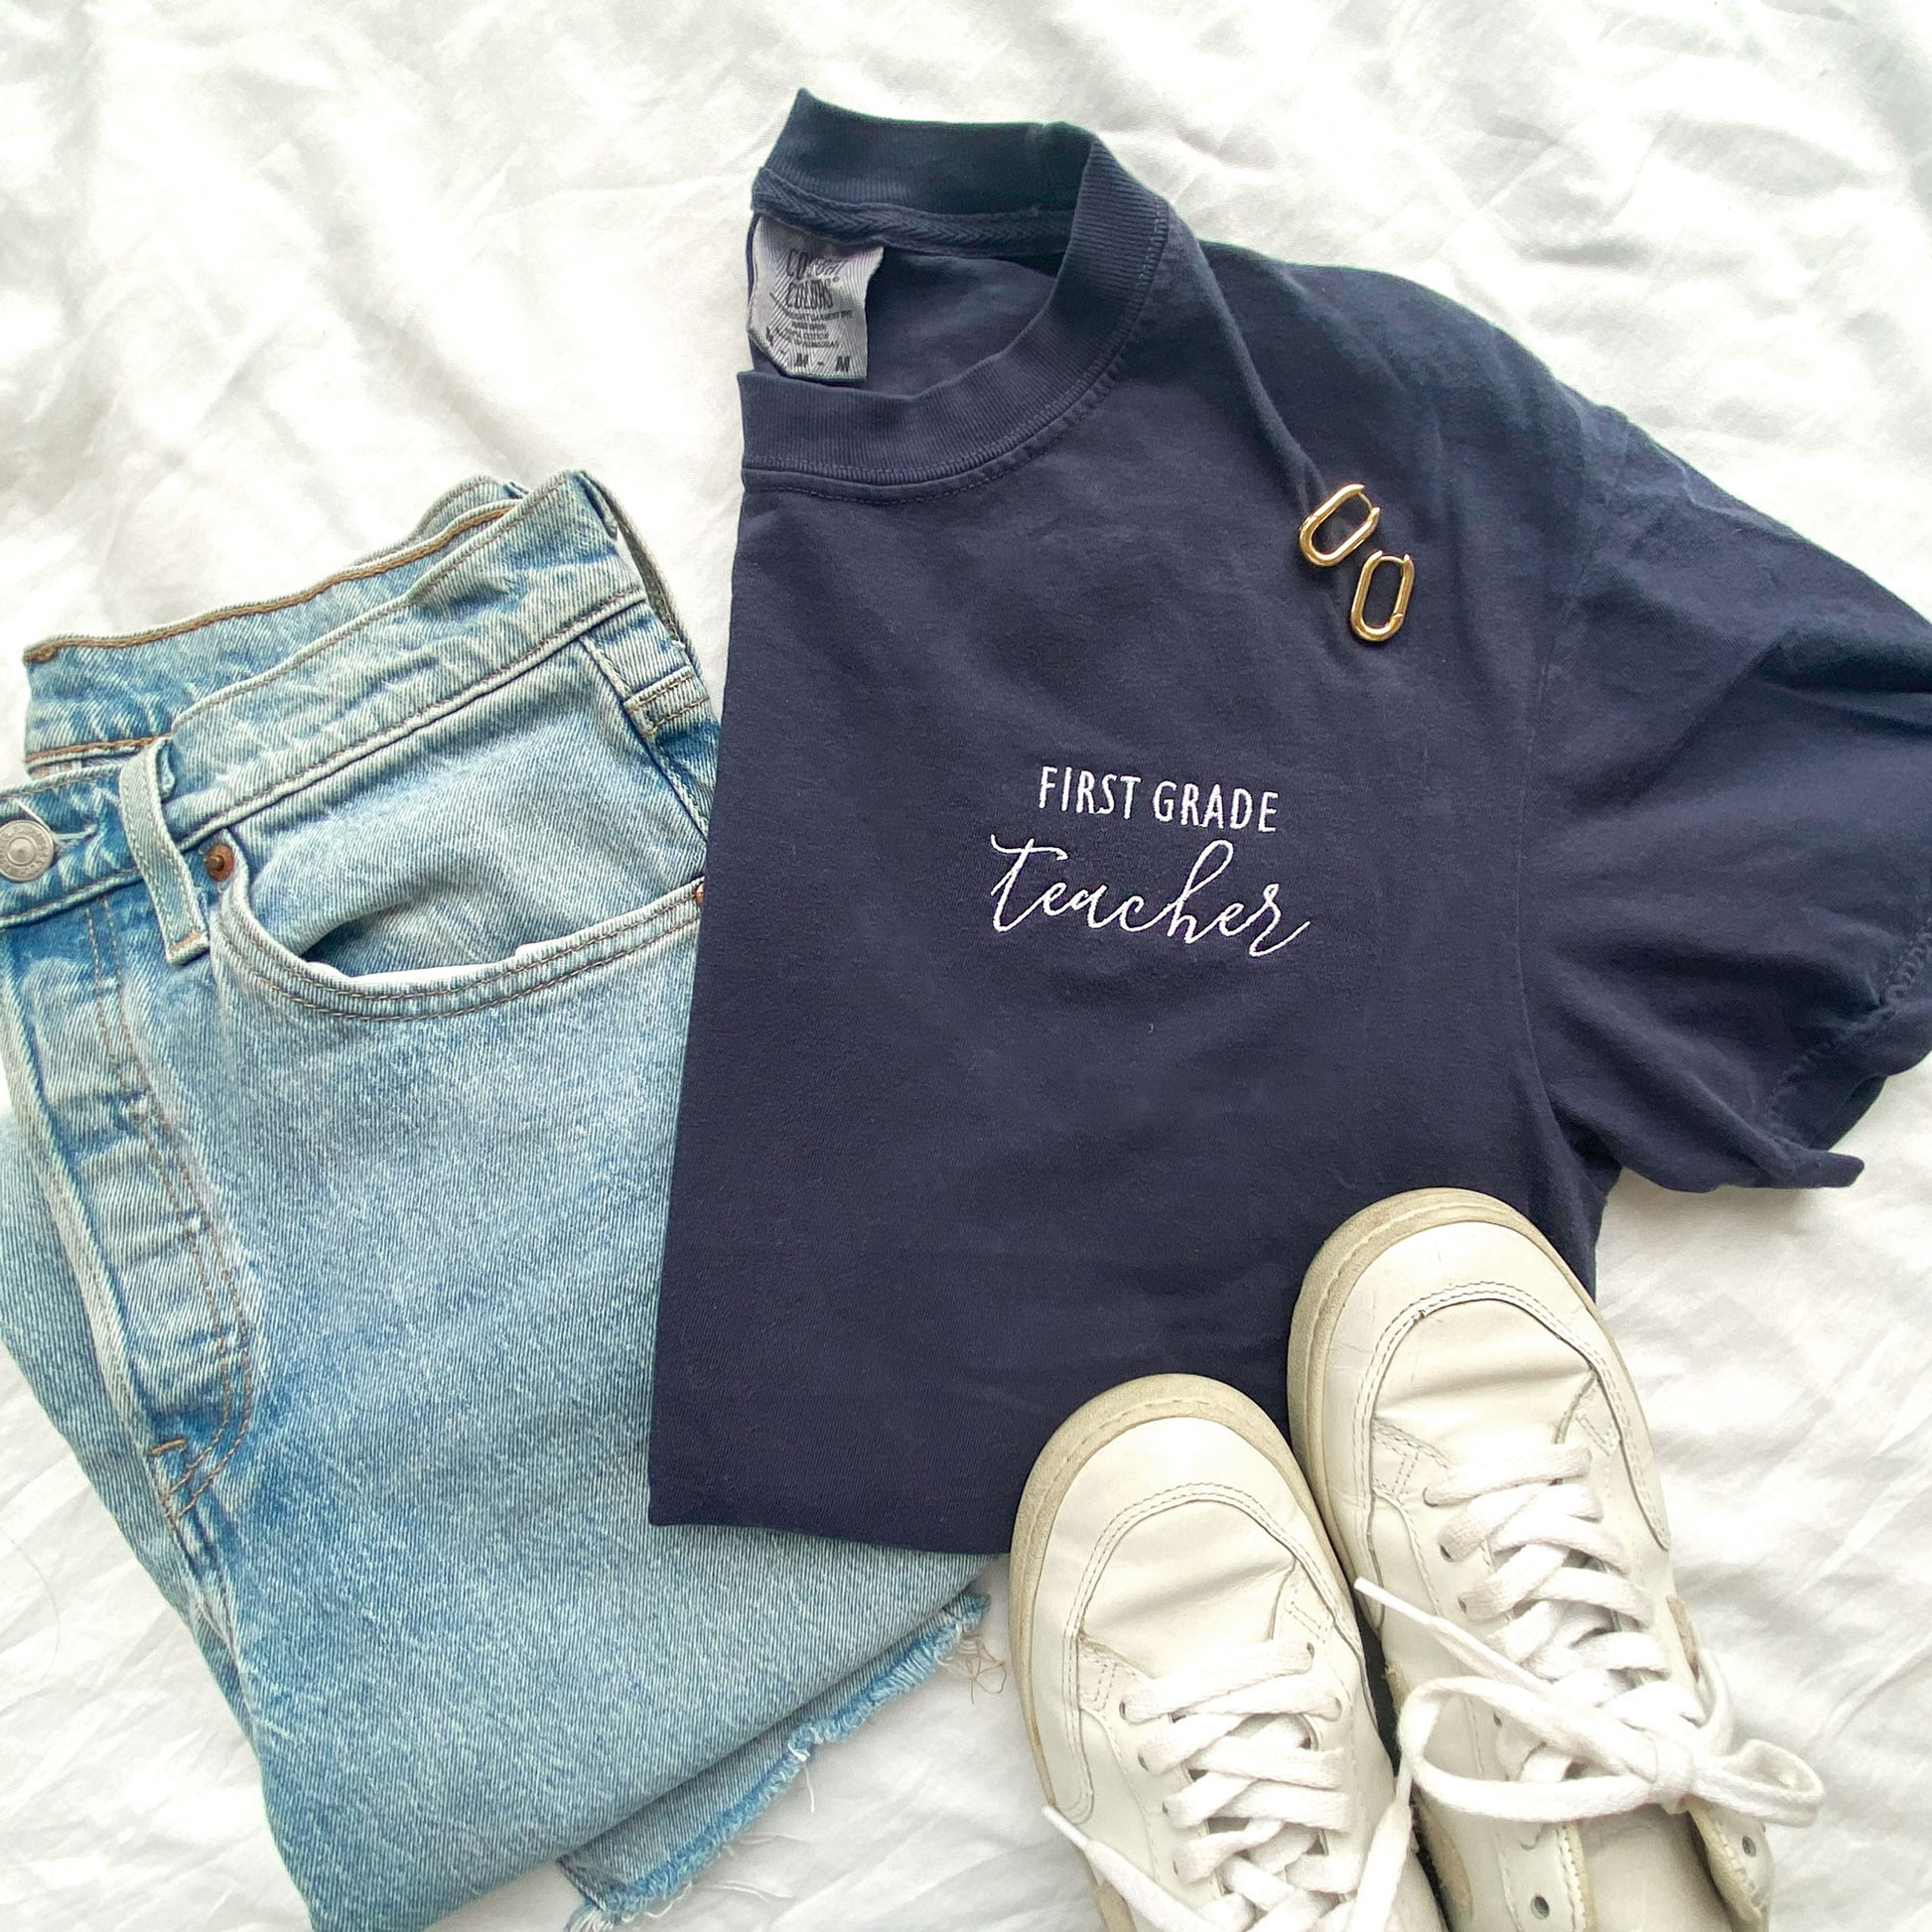 styled flat lay of a navy comfort colors tshirt with personalized grade level and teacher embroidered design in white thread